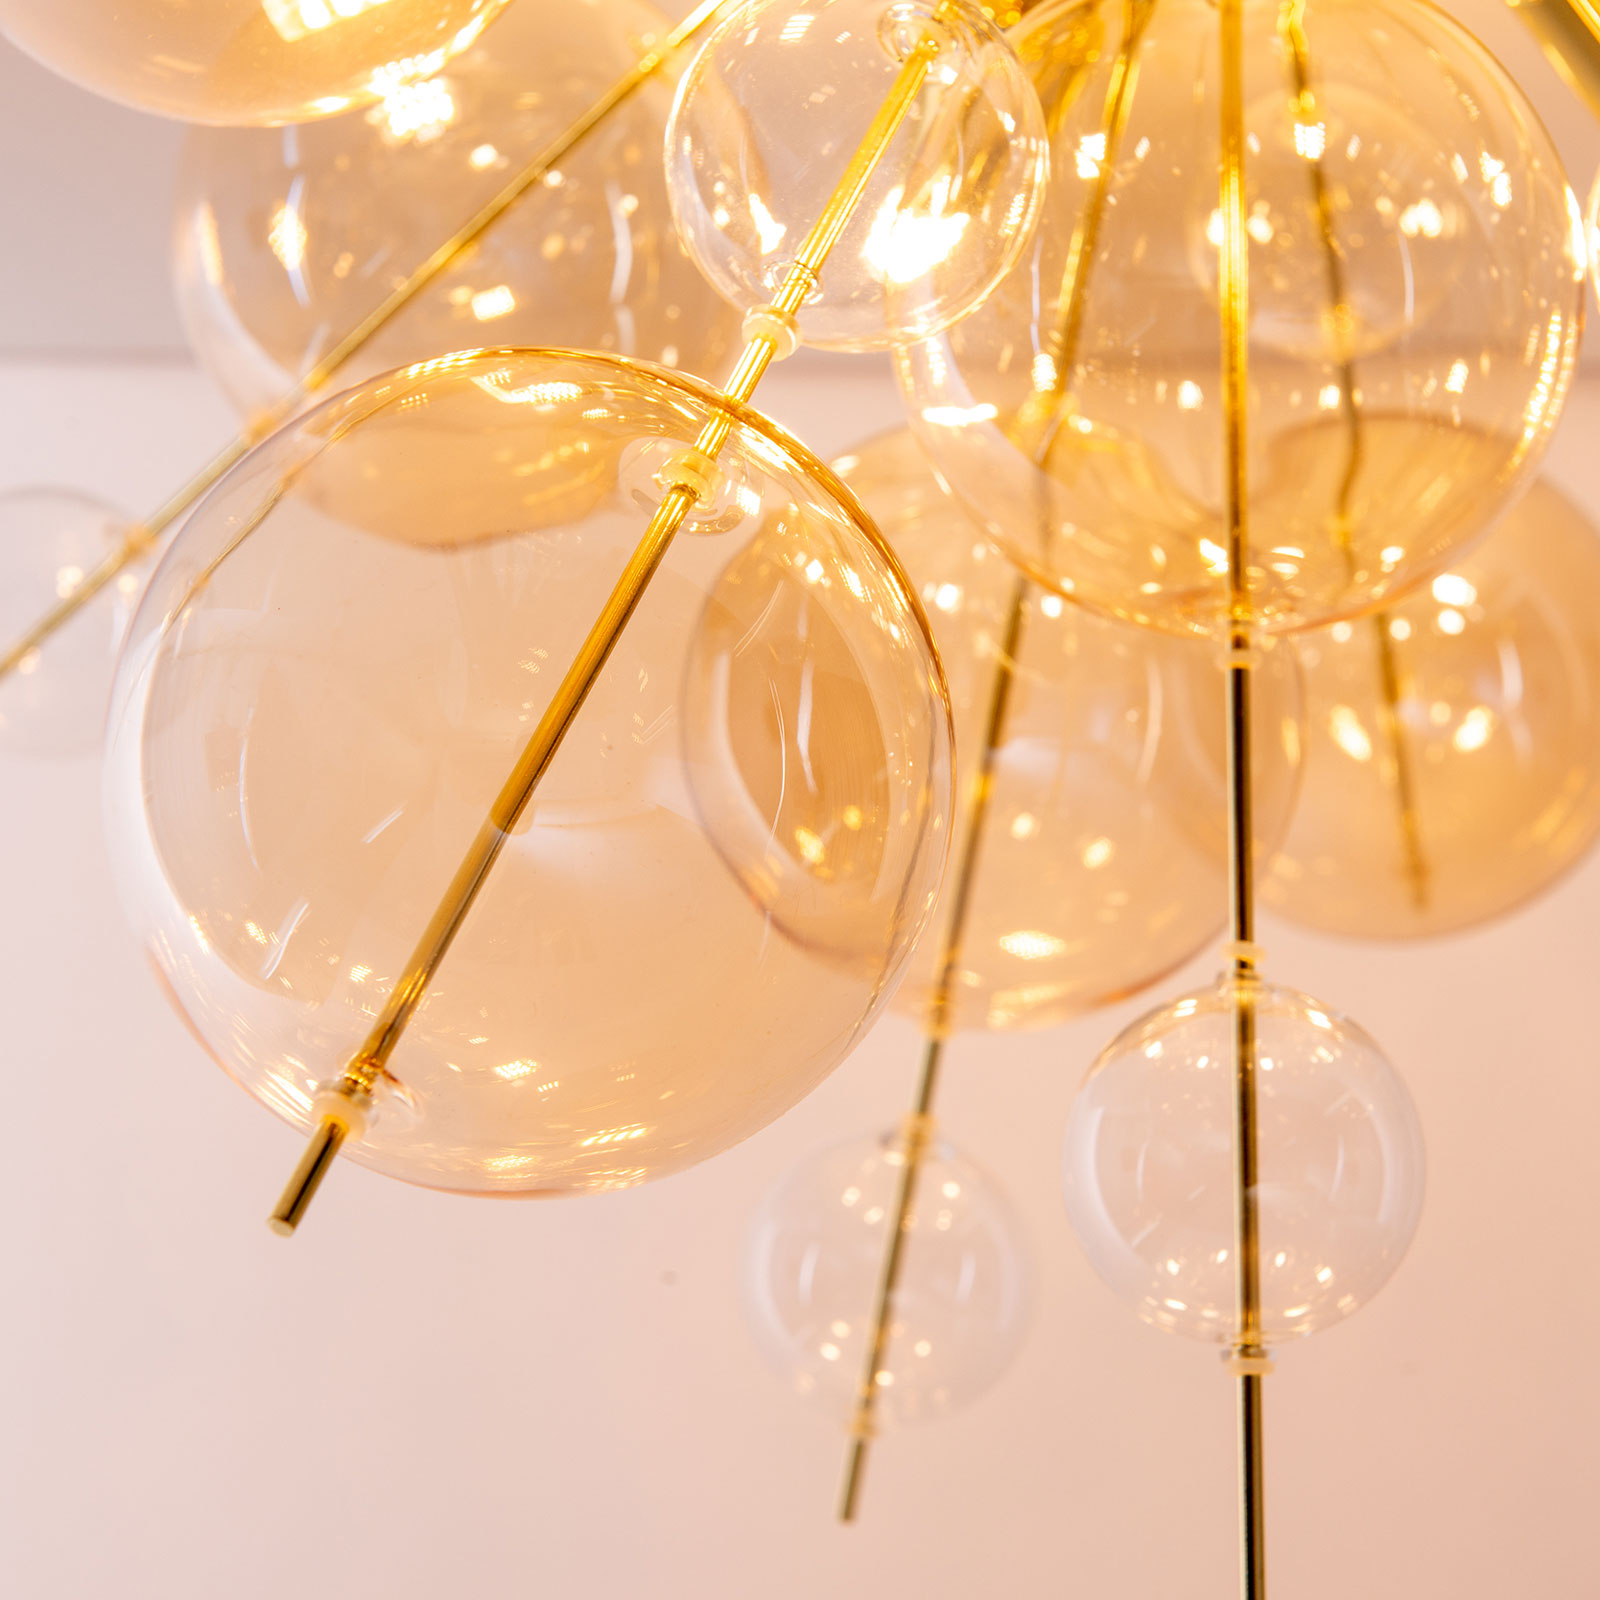 Explosion ceiling light with amber-coloured globes